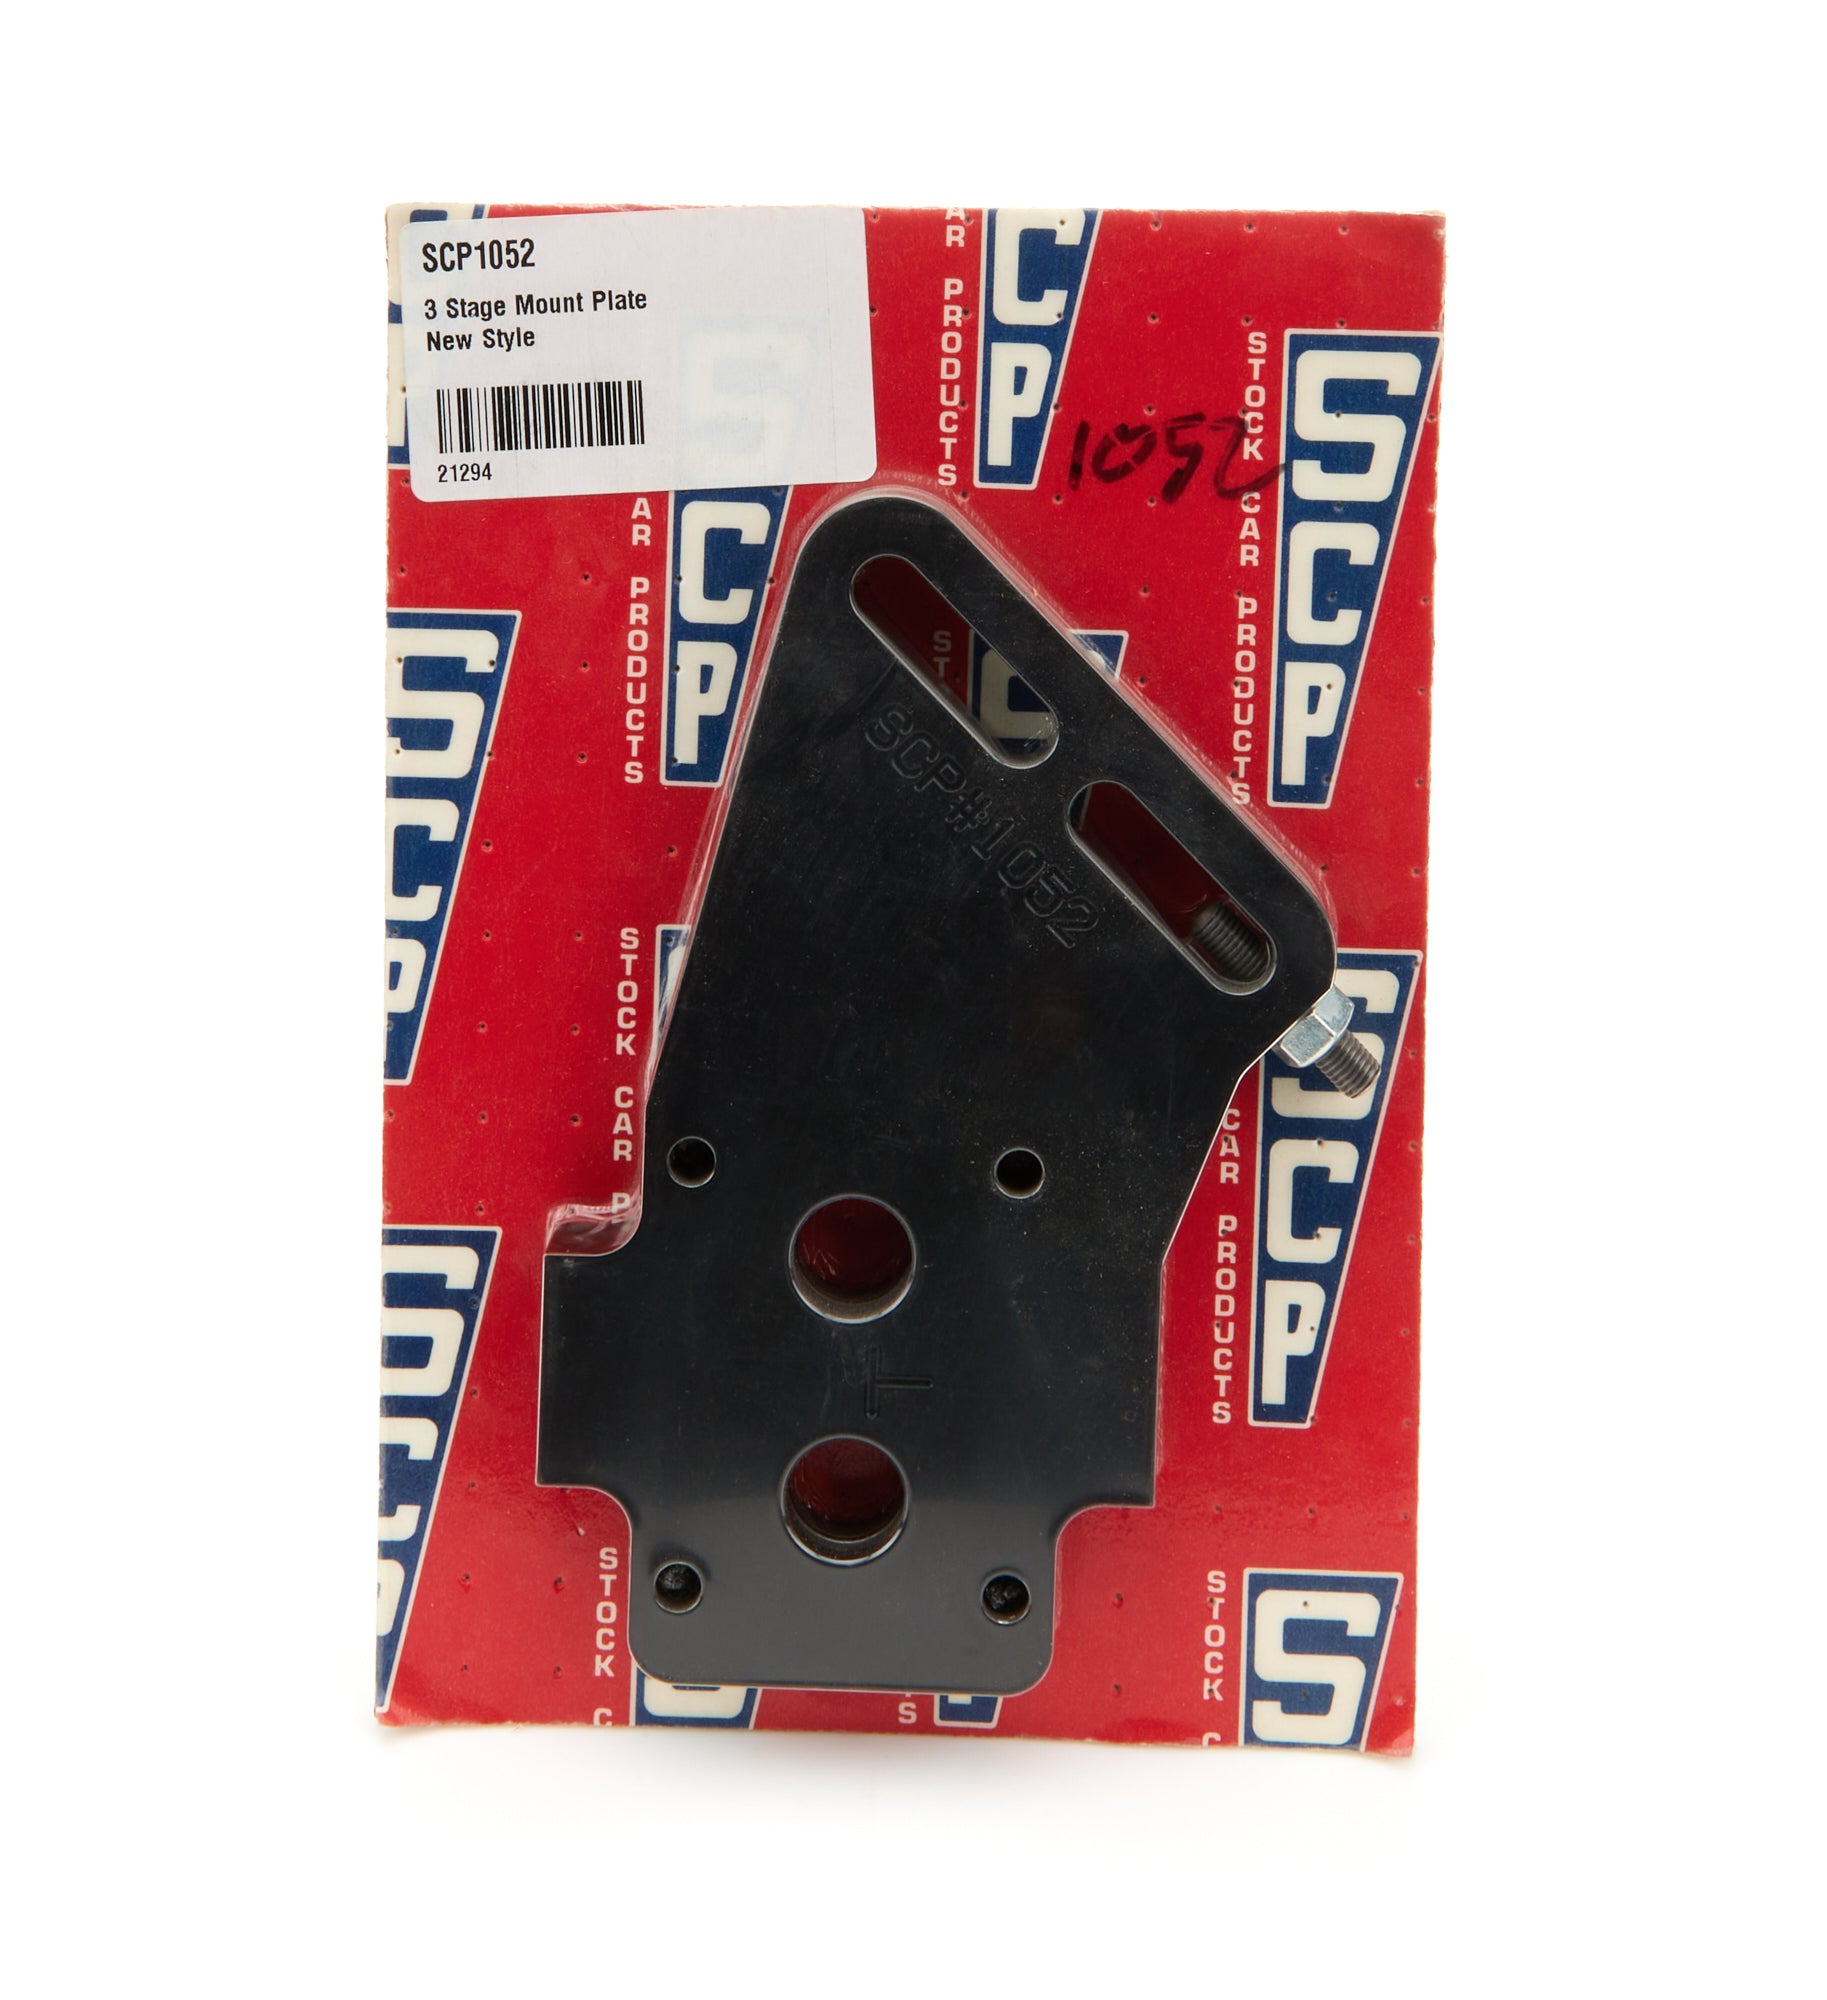 Stock Car Prod-Oil Pumps 3 Stage Mount Plate New Style SCP1052